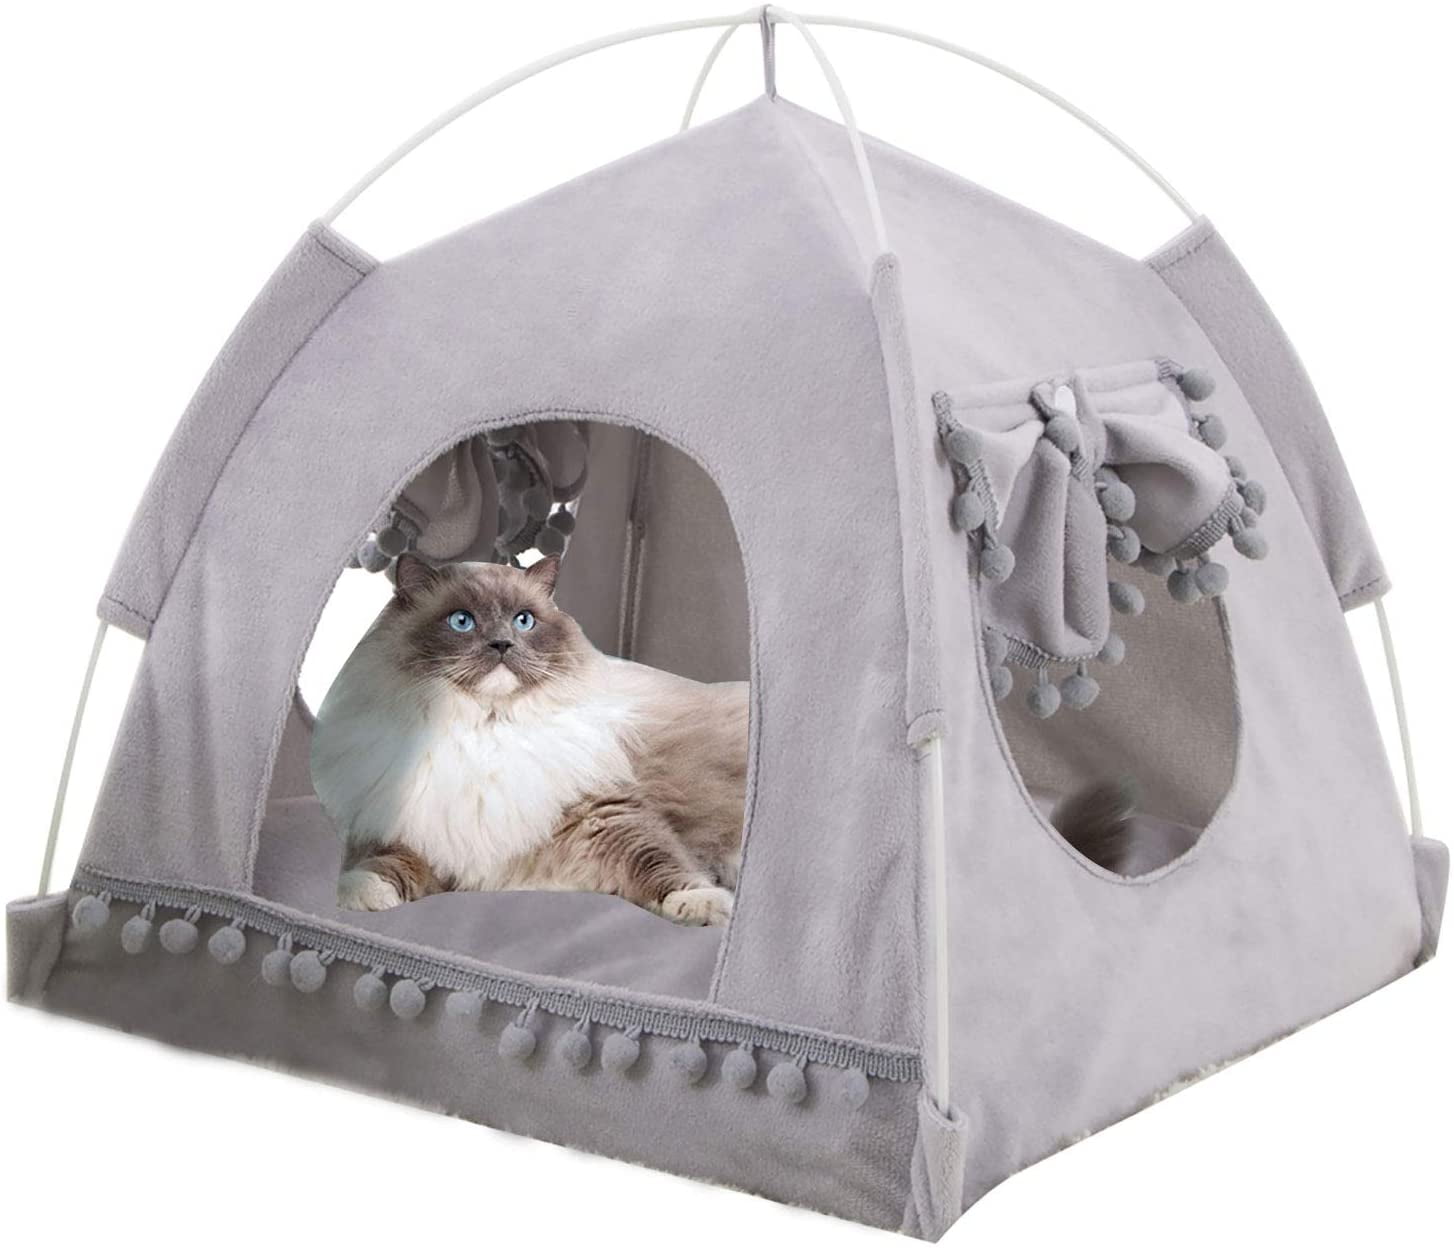 Cat Tent Cave Bed for Cats Small Dog,Pet Tent Portable Igloo Playpen 2-in-1 Self-Warming Comfortable Triangle Dogs Puppy Portable Folding Pet Tent & House Cage with Removable Washable Cushion Pillow 